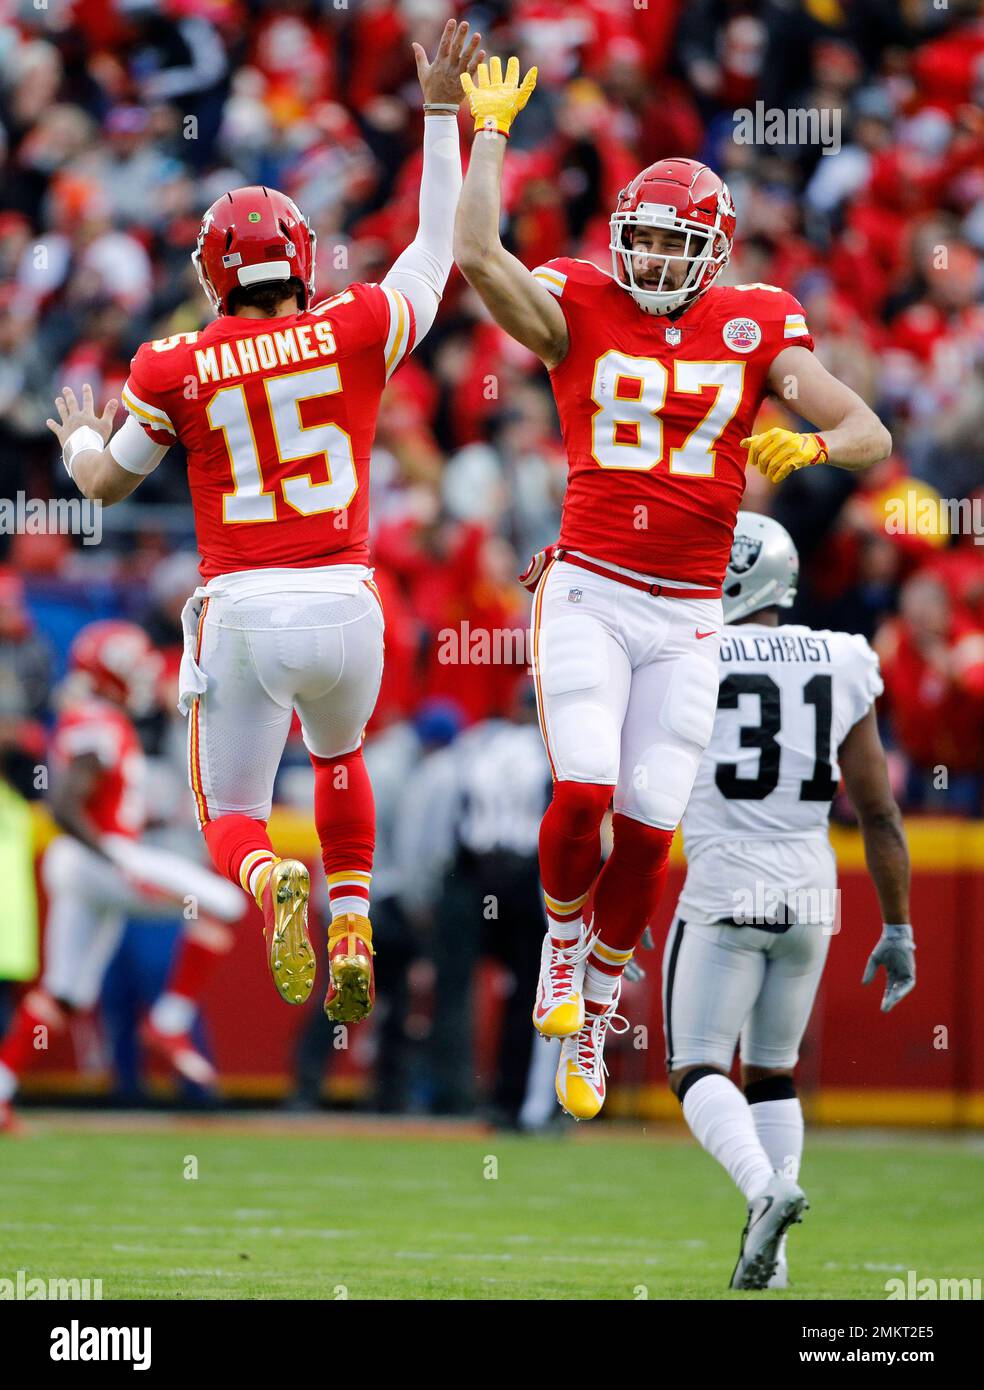 Super Bowl: Travis Kelce Points Out Open Player to Mahomes (VIDEO)